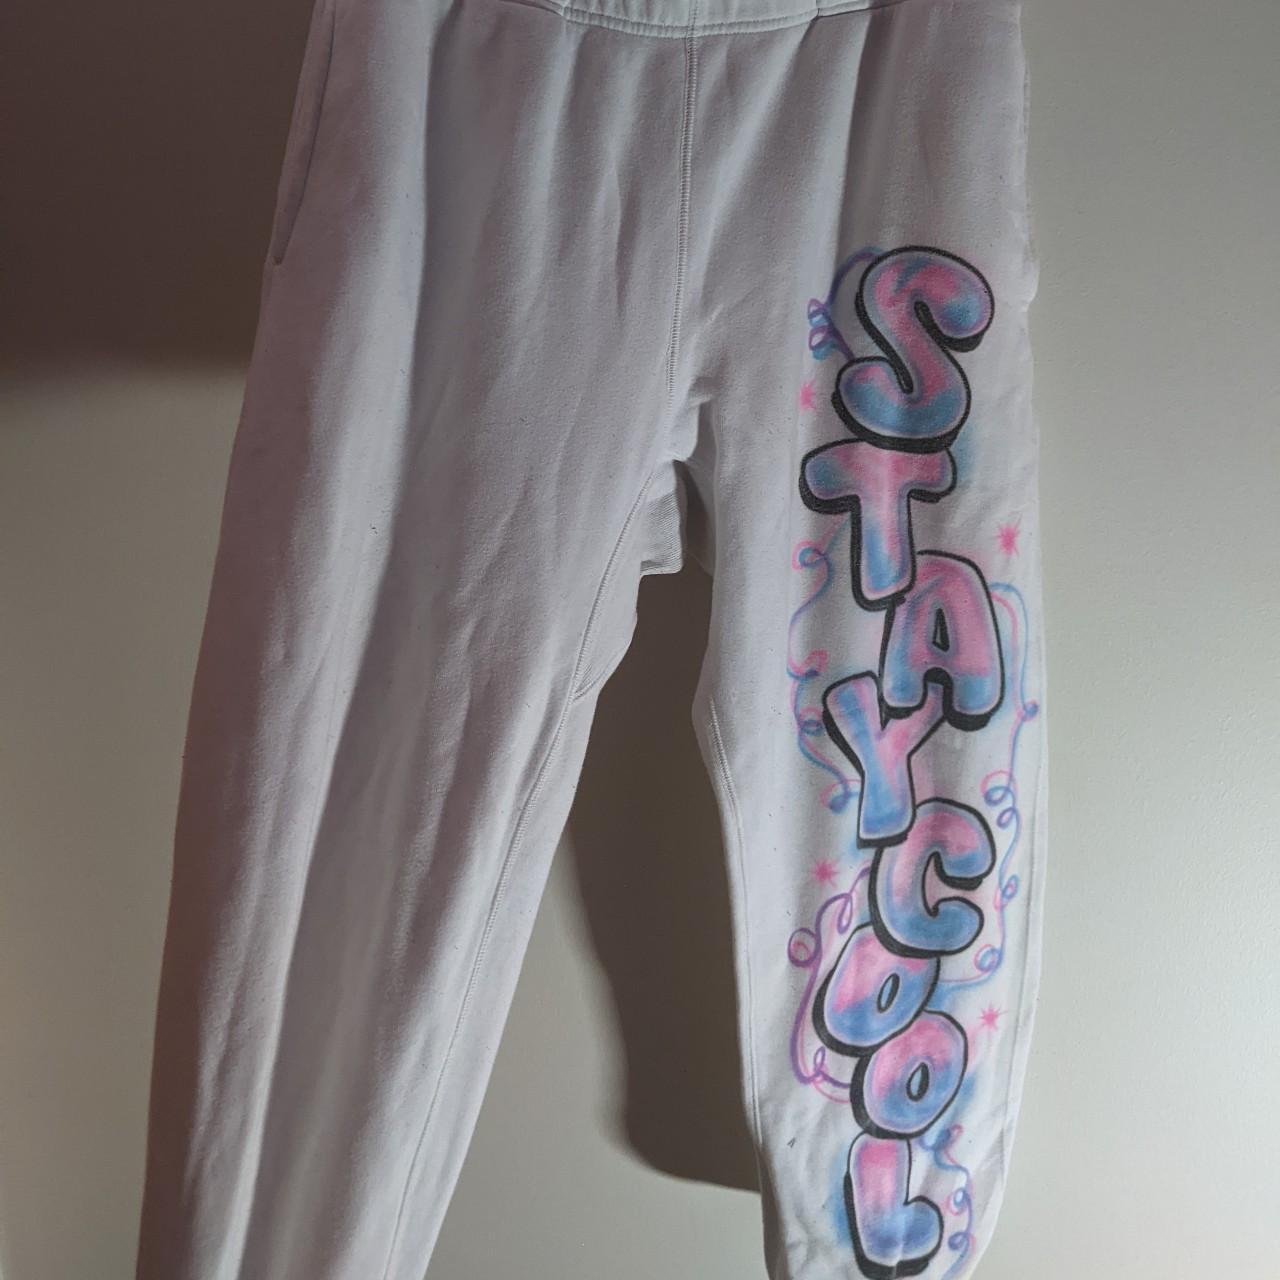 Product Image 2 - Stay Cool Airbrushed Birthday Sweatpants

Size: